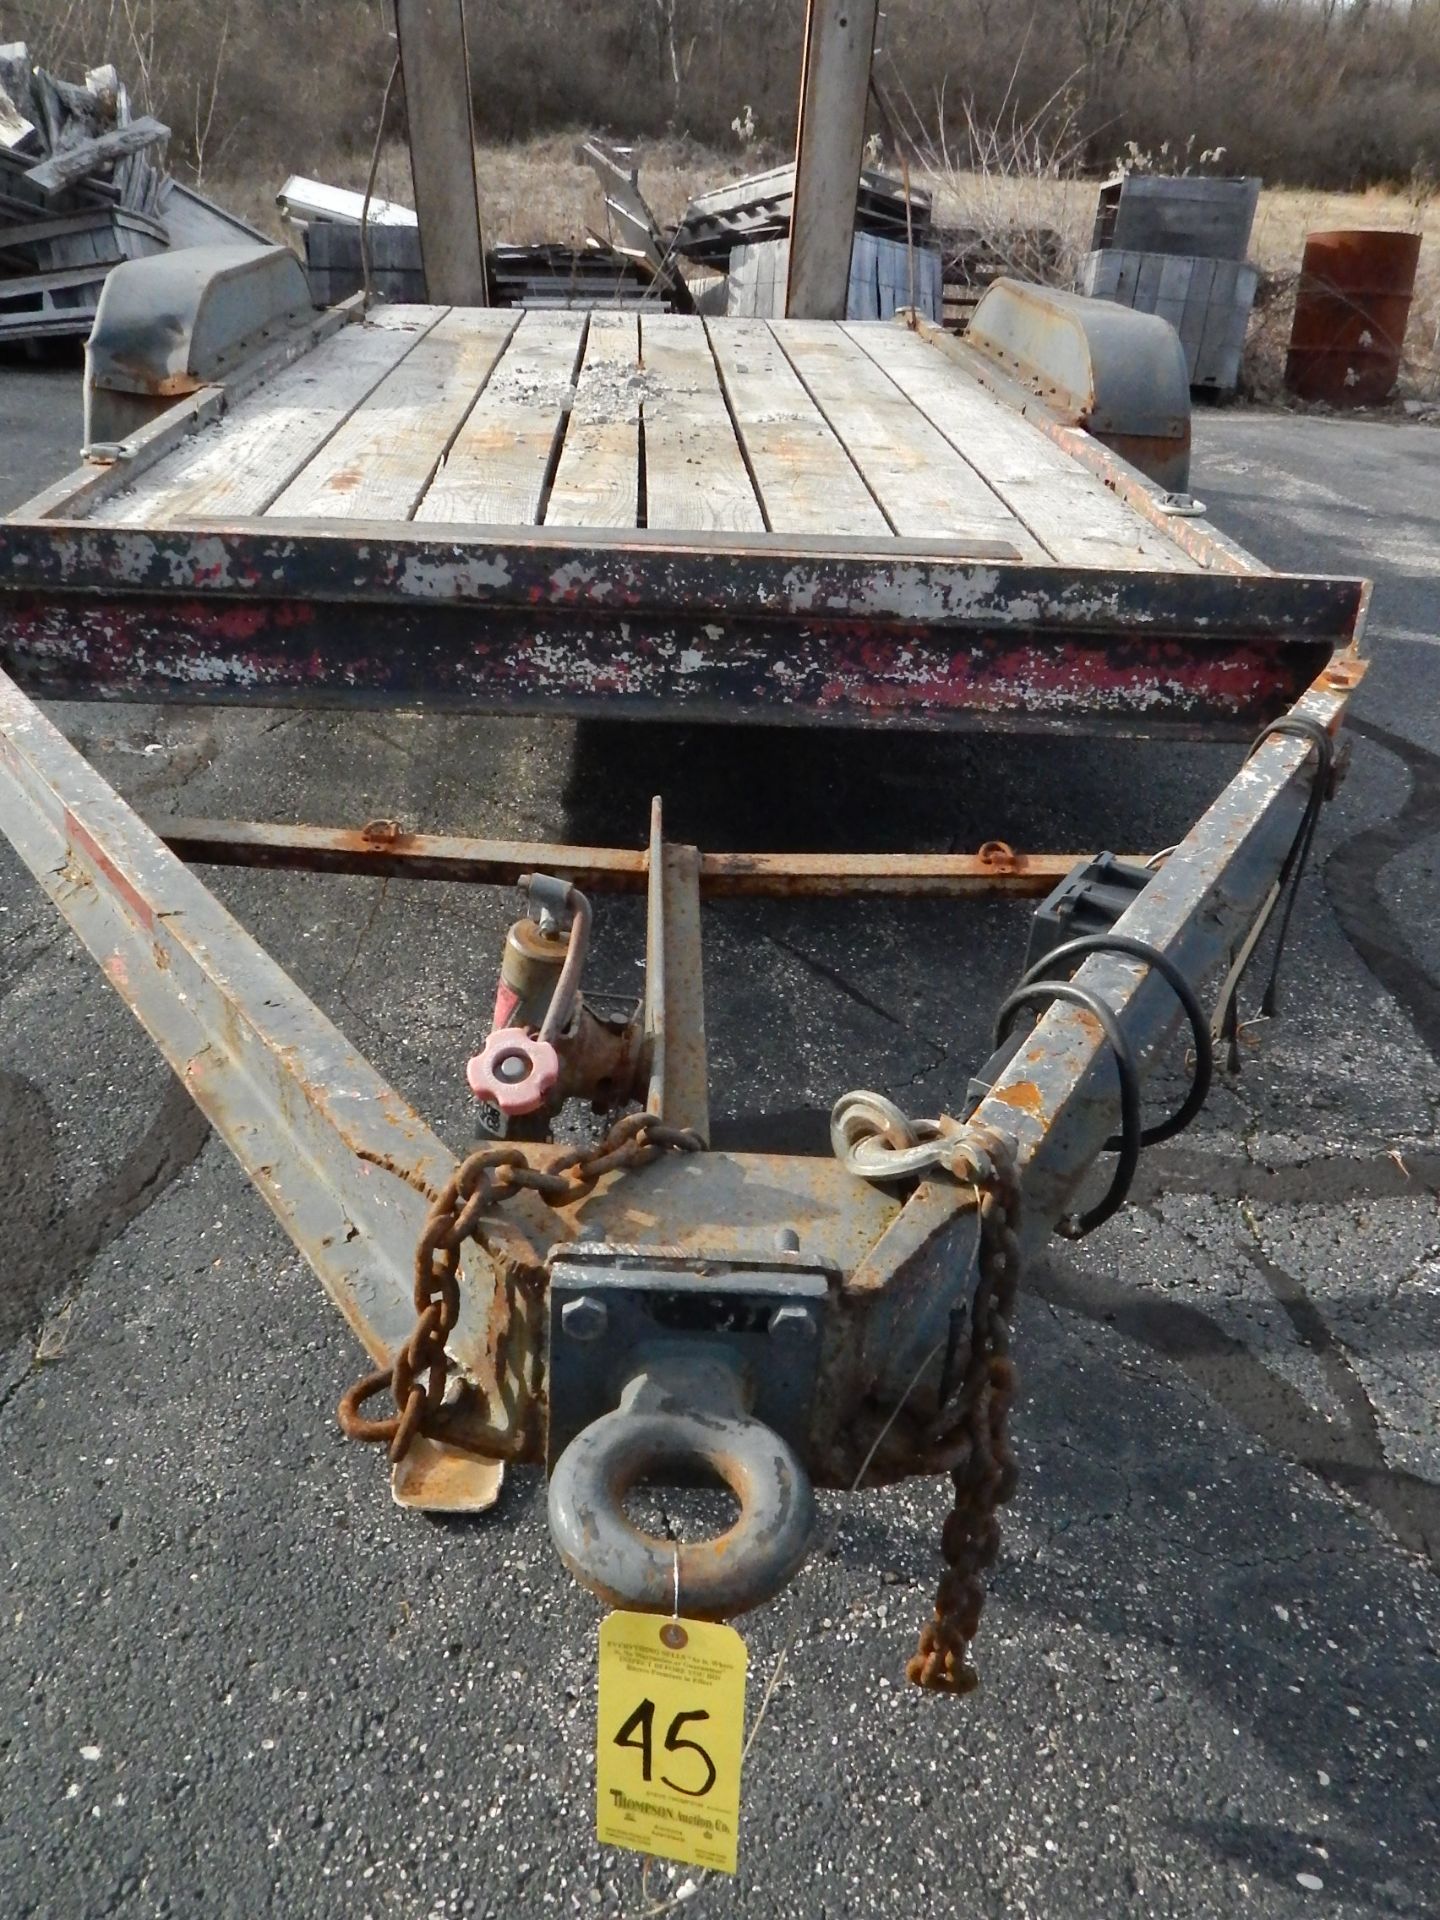 Tandem Axle Utility Trailer, 14 ft. Overall Length, 12 ft. Deck, 2 ft. Beavertail, Ramps, 72 in - Image 8 of 8